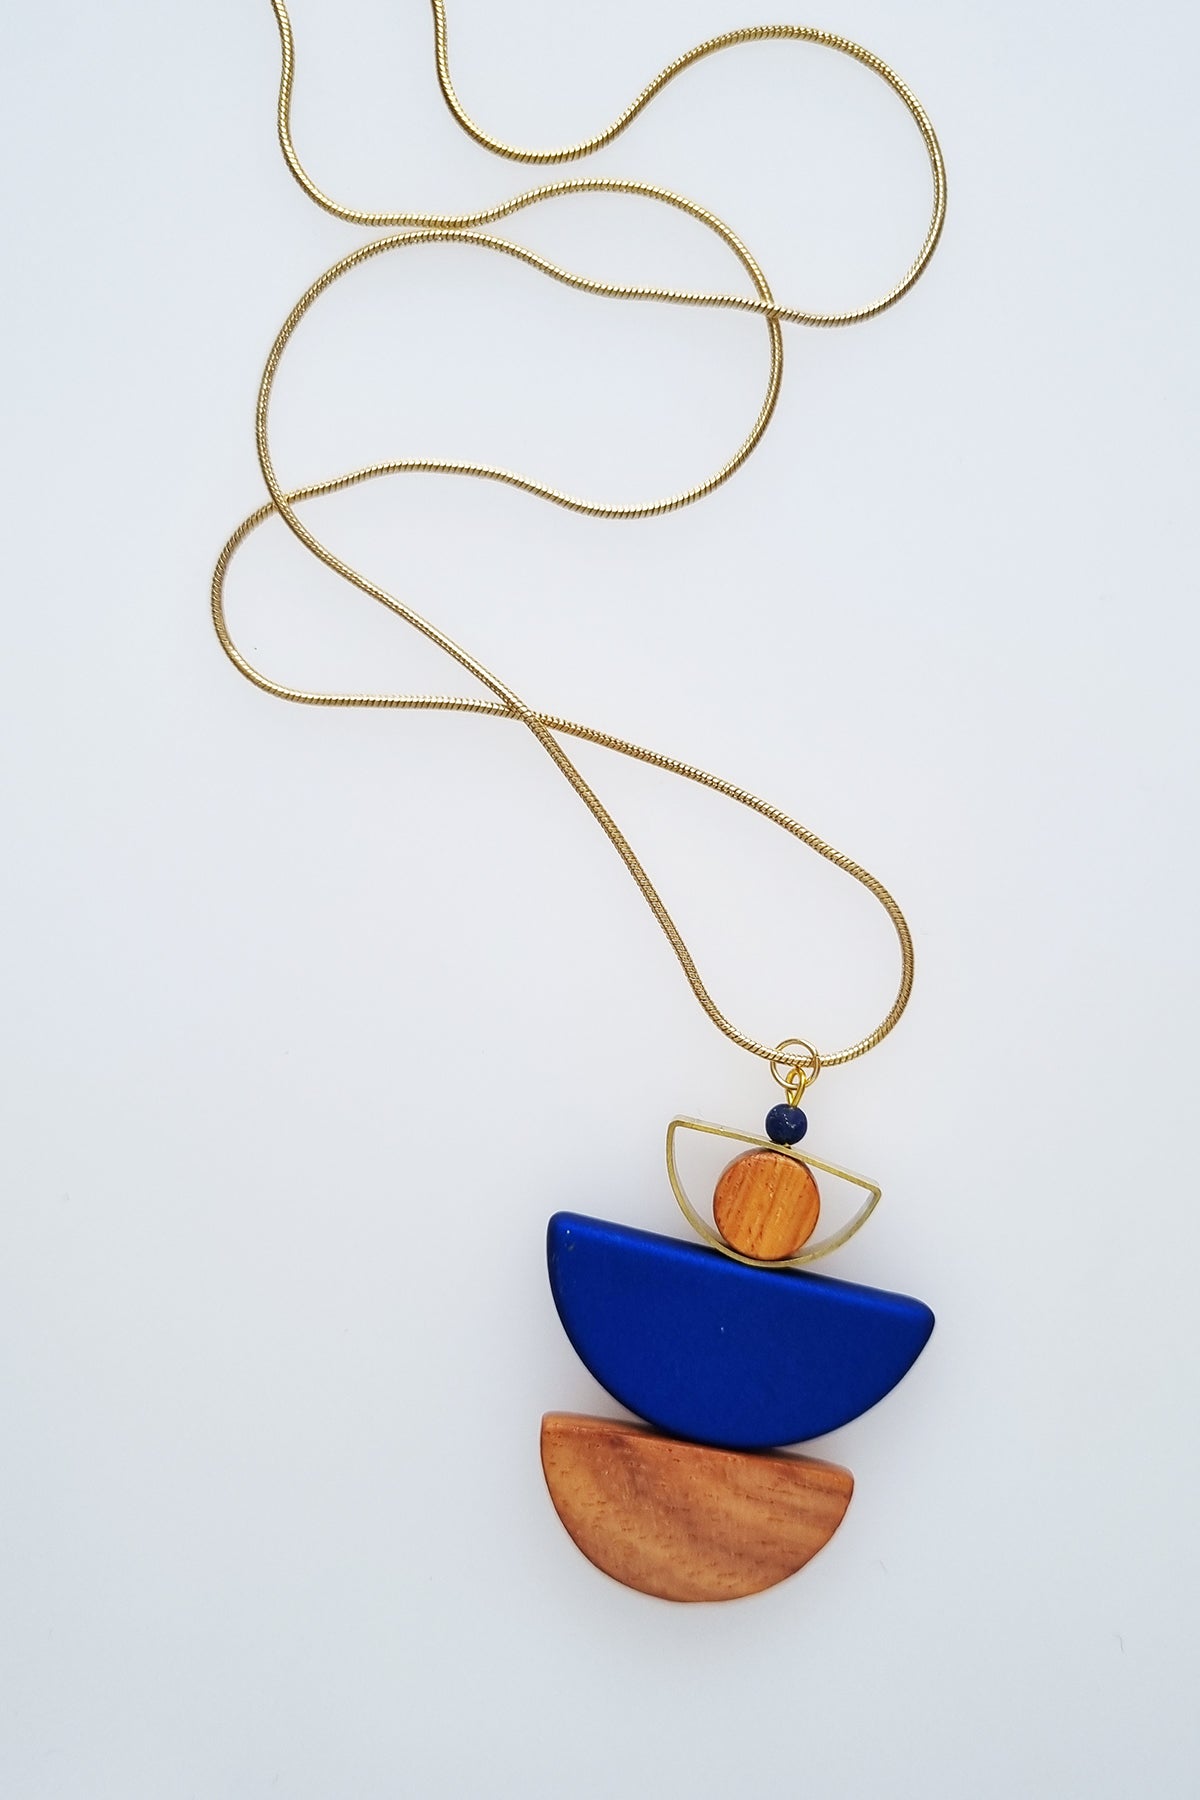 A necklace with a gold chain sits against a white background. It features a small wooden bead, followed by a brass D shape with a wooden circle bead enclosed, followed by a blue D shaped bead, and a wooden D shape bead.